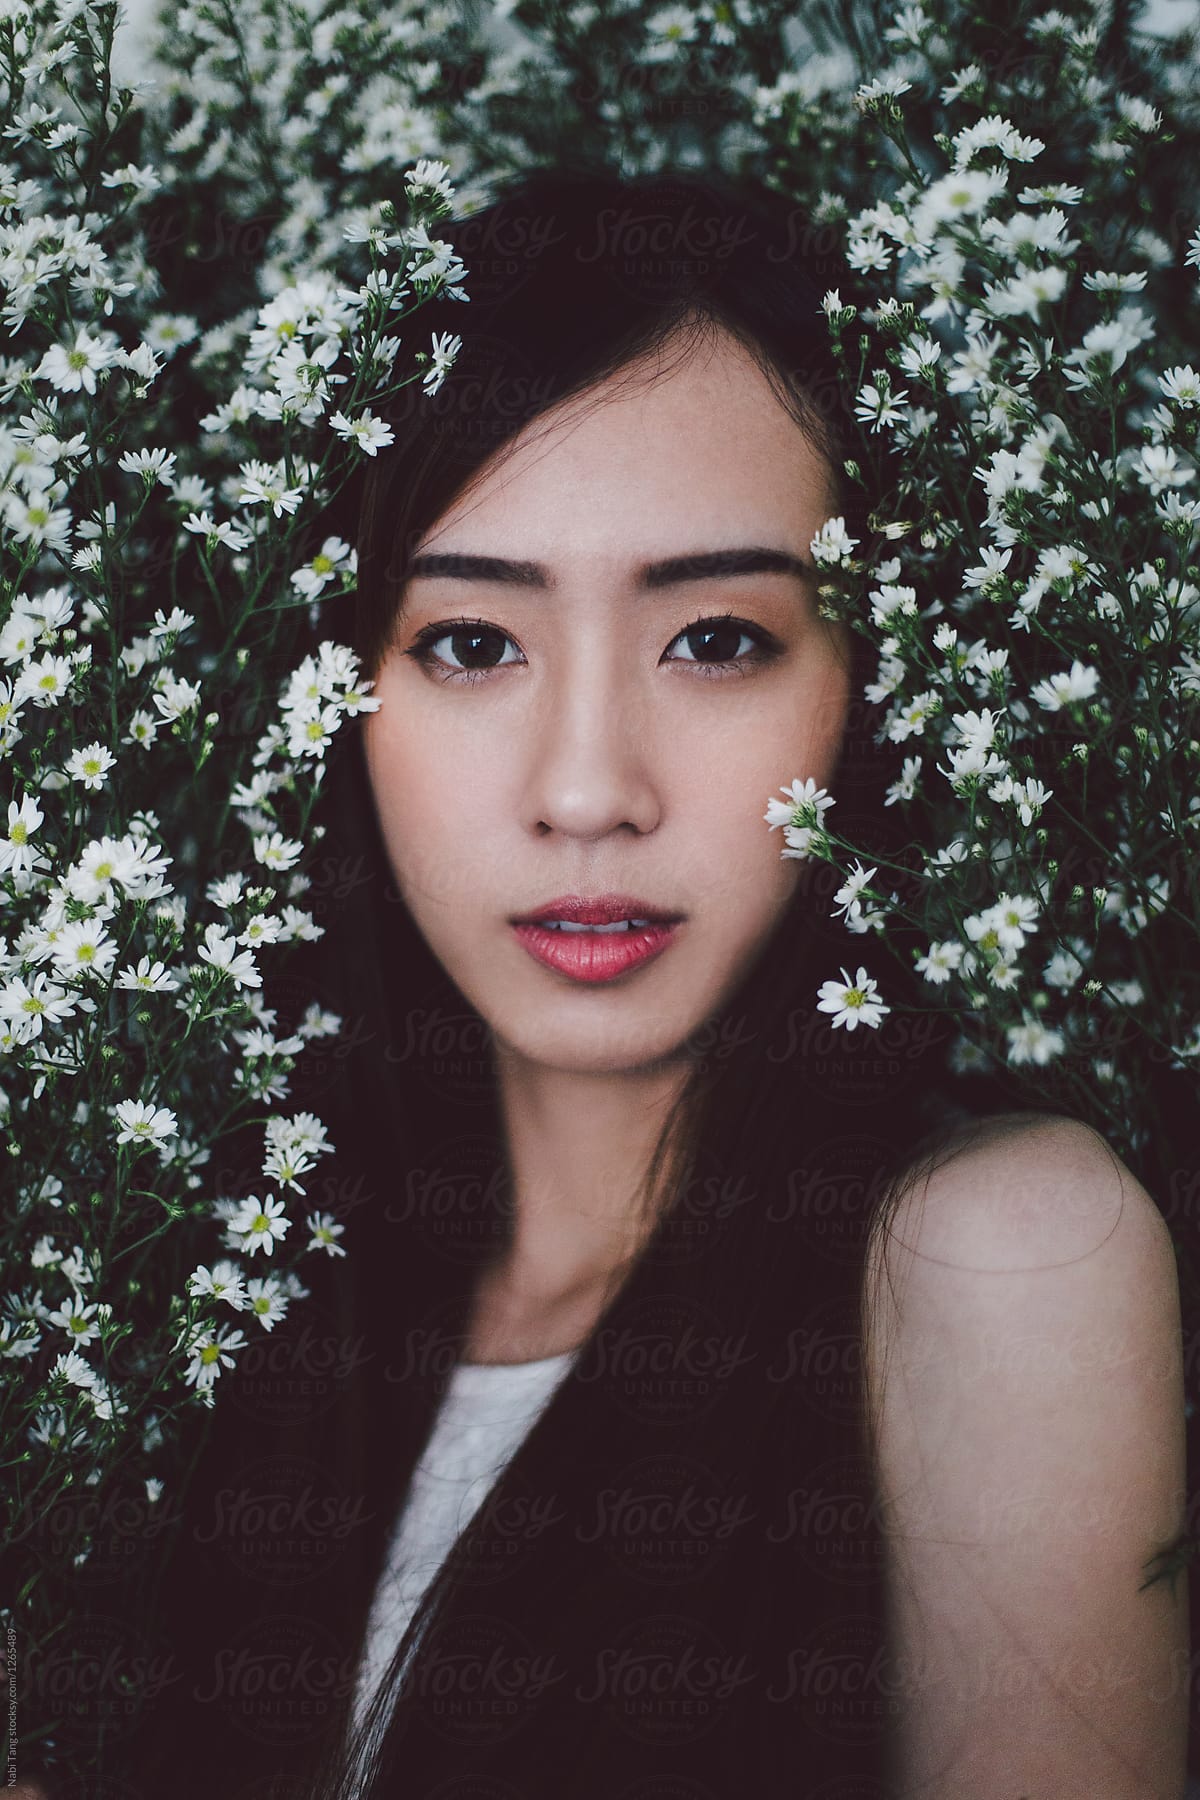 Beautiful Young East Asian Woman Portrait From The Flower Bush By Stocksy Contributor Nabi